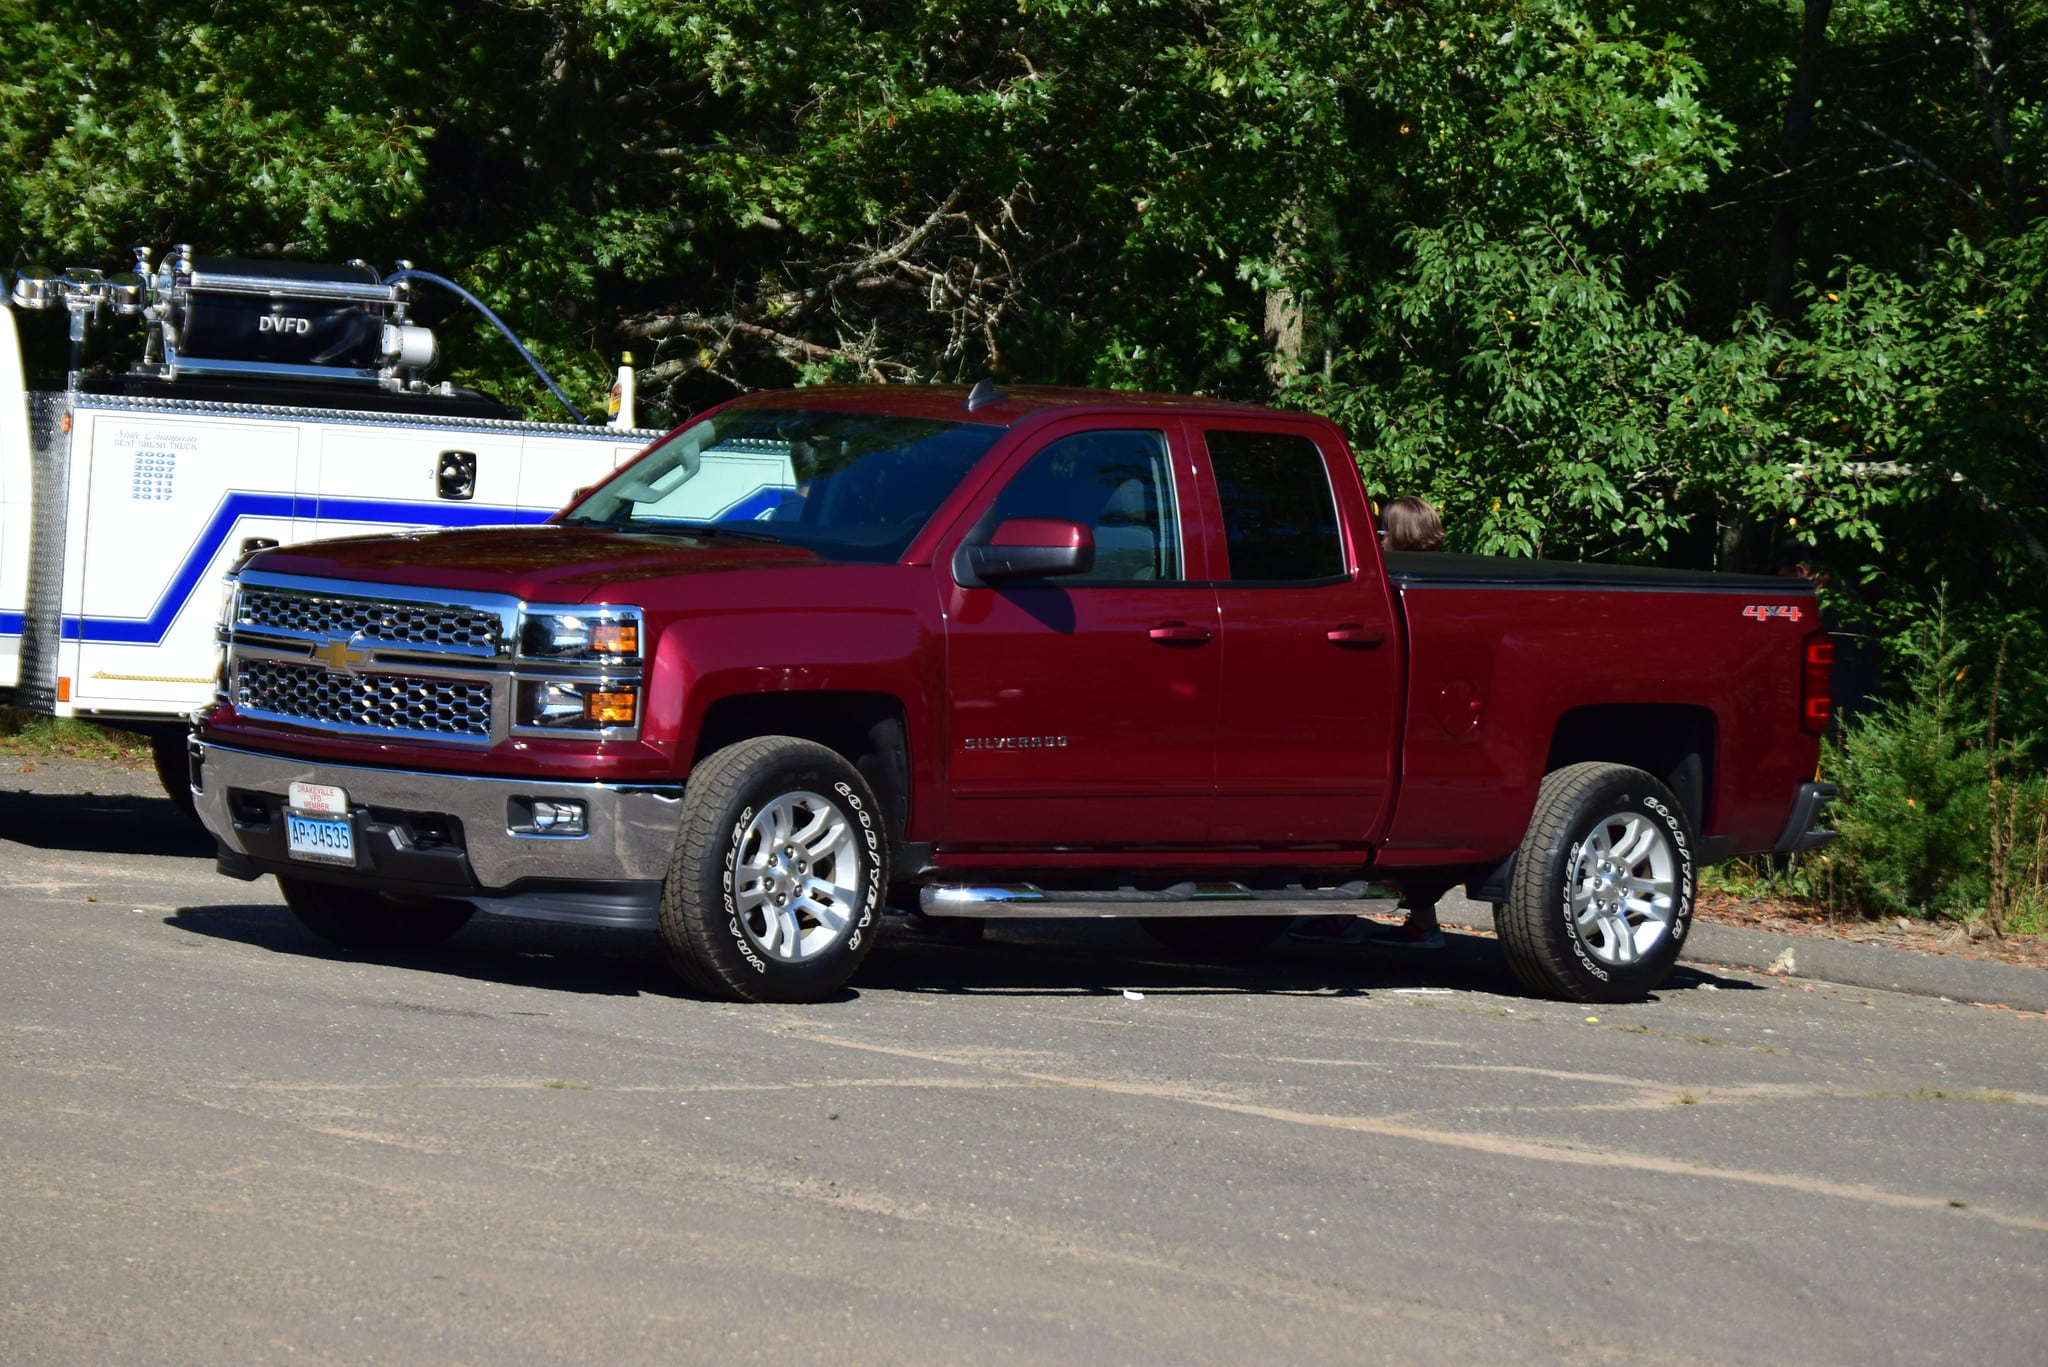 3 Ways a Truck Rental Can Help You This Summer